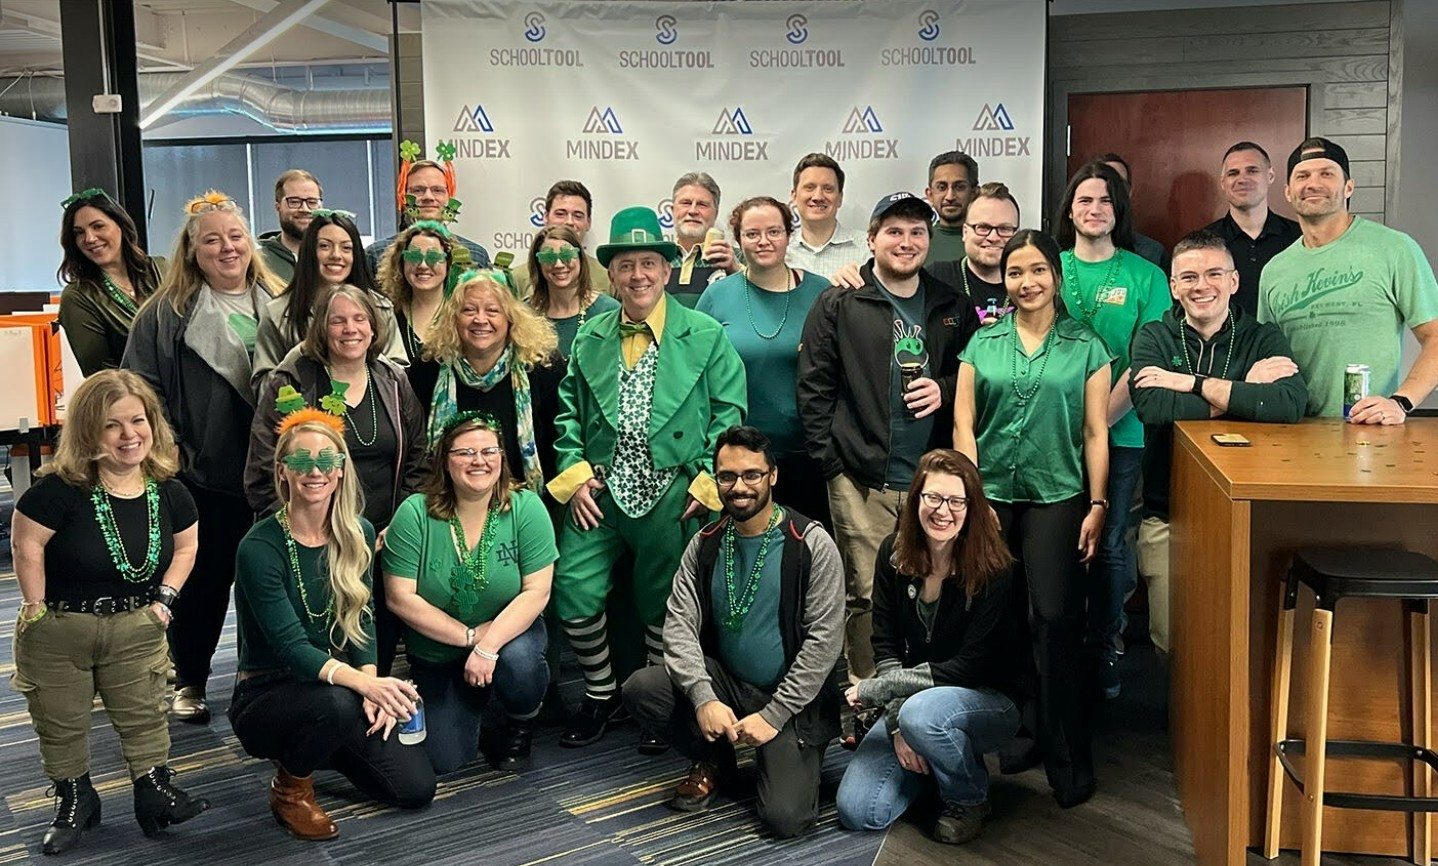 Office fun, wearing green for St. Patrick's Day!